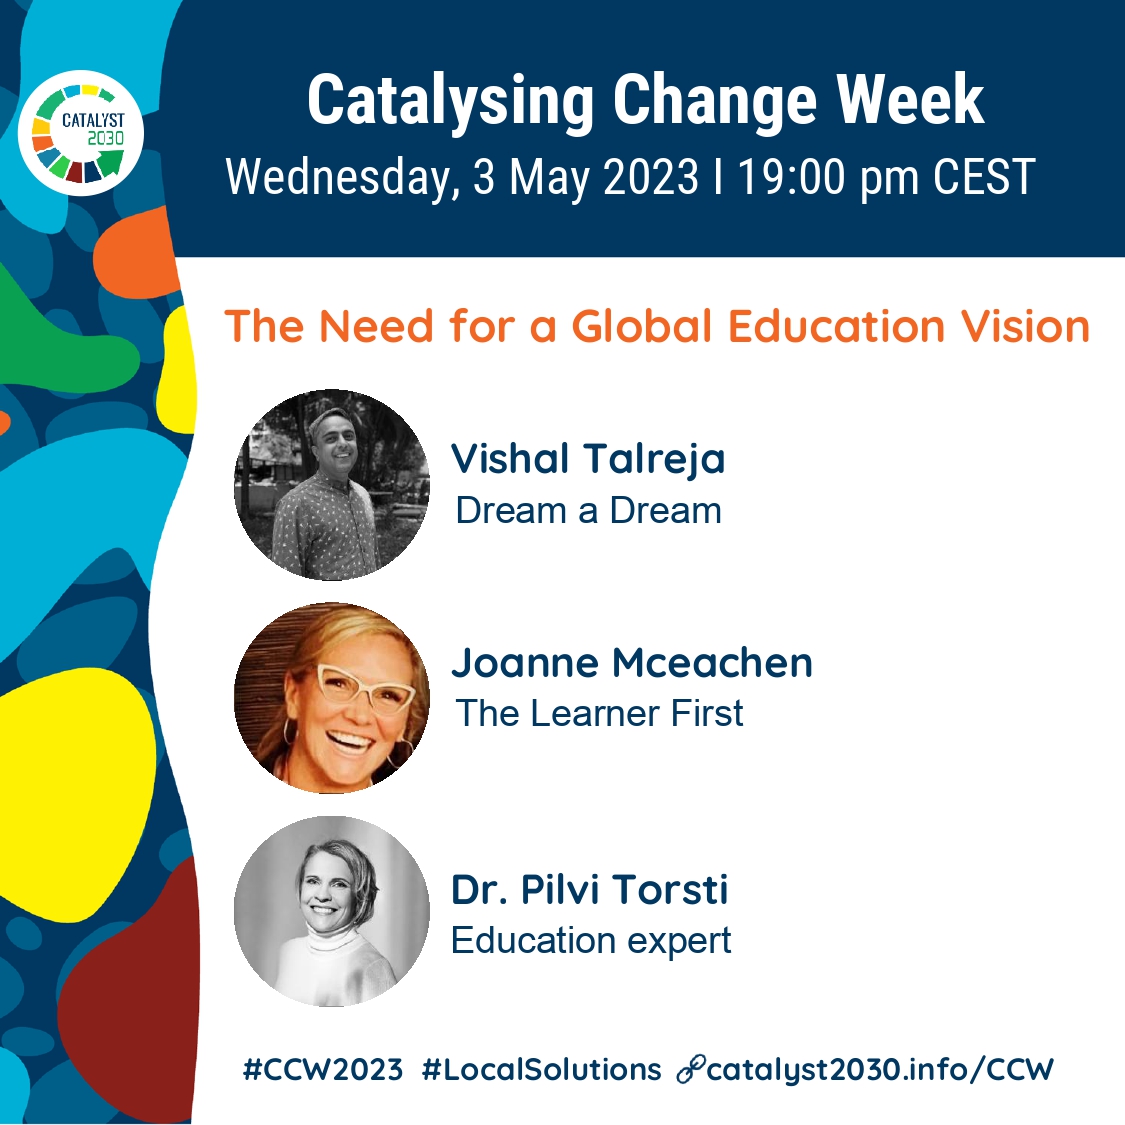 Catch @vishaltalreja, @joannemceachen & @pilvitorsti 
as they discuss the need for a new global education vision at the Catalysing Change Week on 3 May - 7:00 pm CEST I 10: 30 PM IST
Register here - lnkd.in/gPEznHb4
Catalyst 2030 #catalysingchangeweek2023 #CCW23